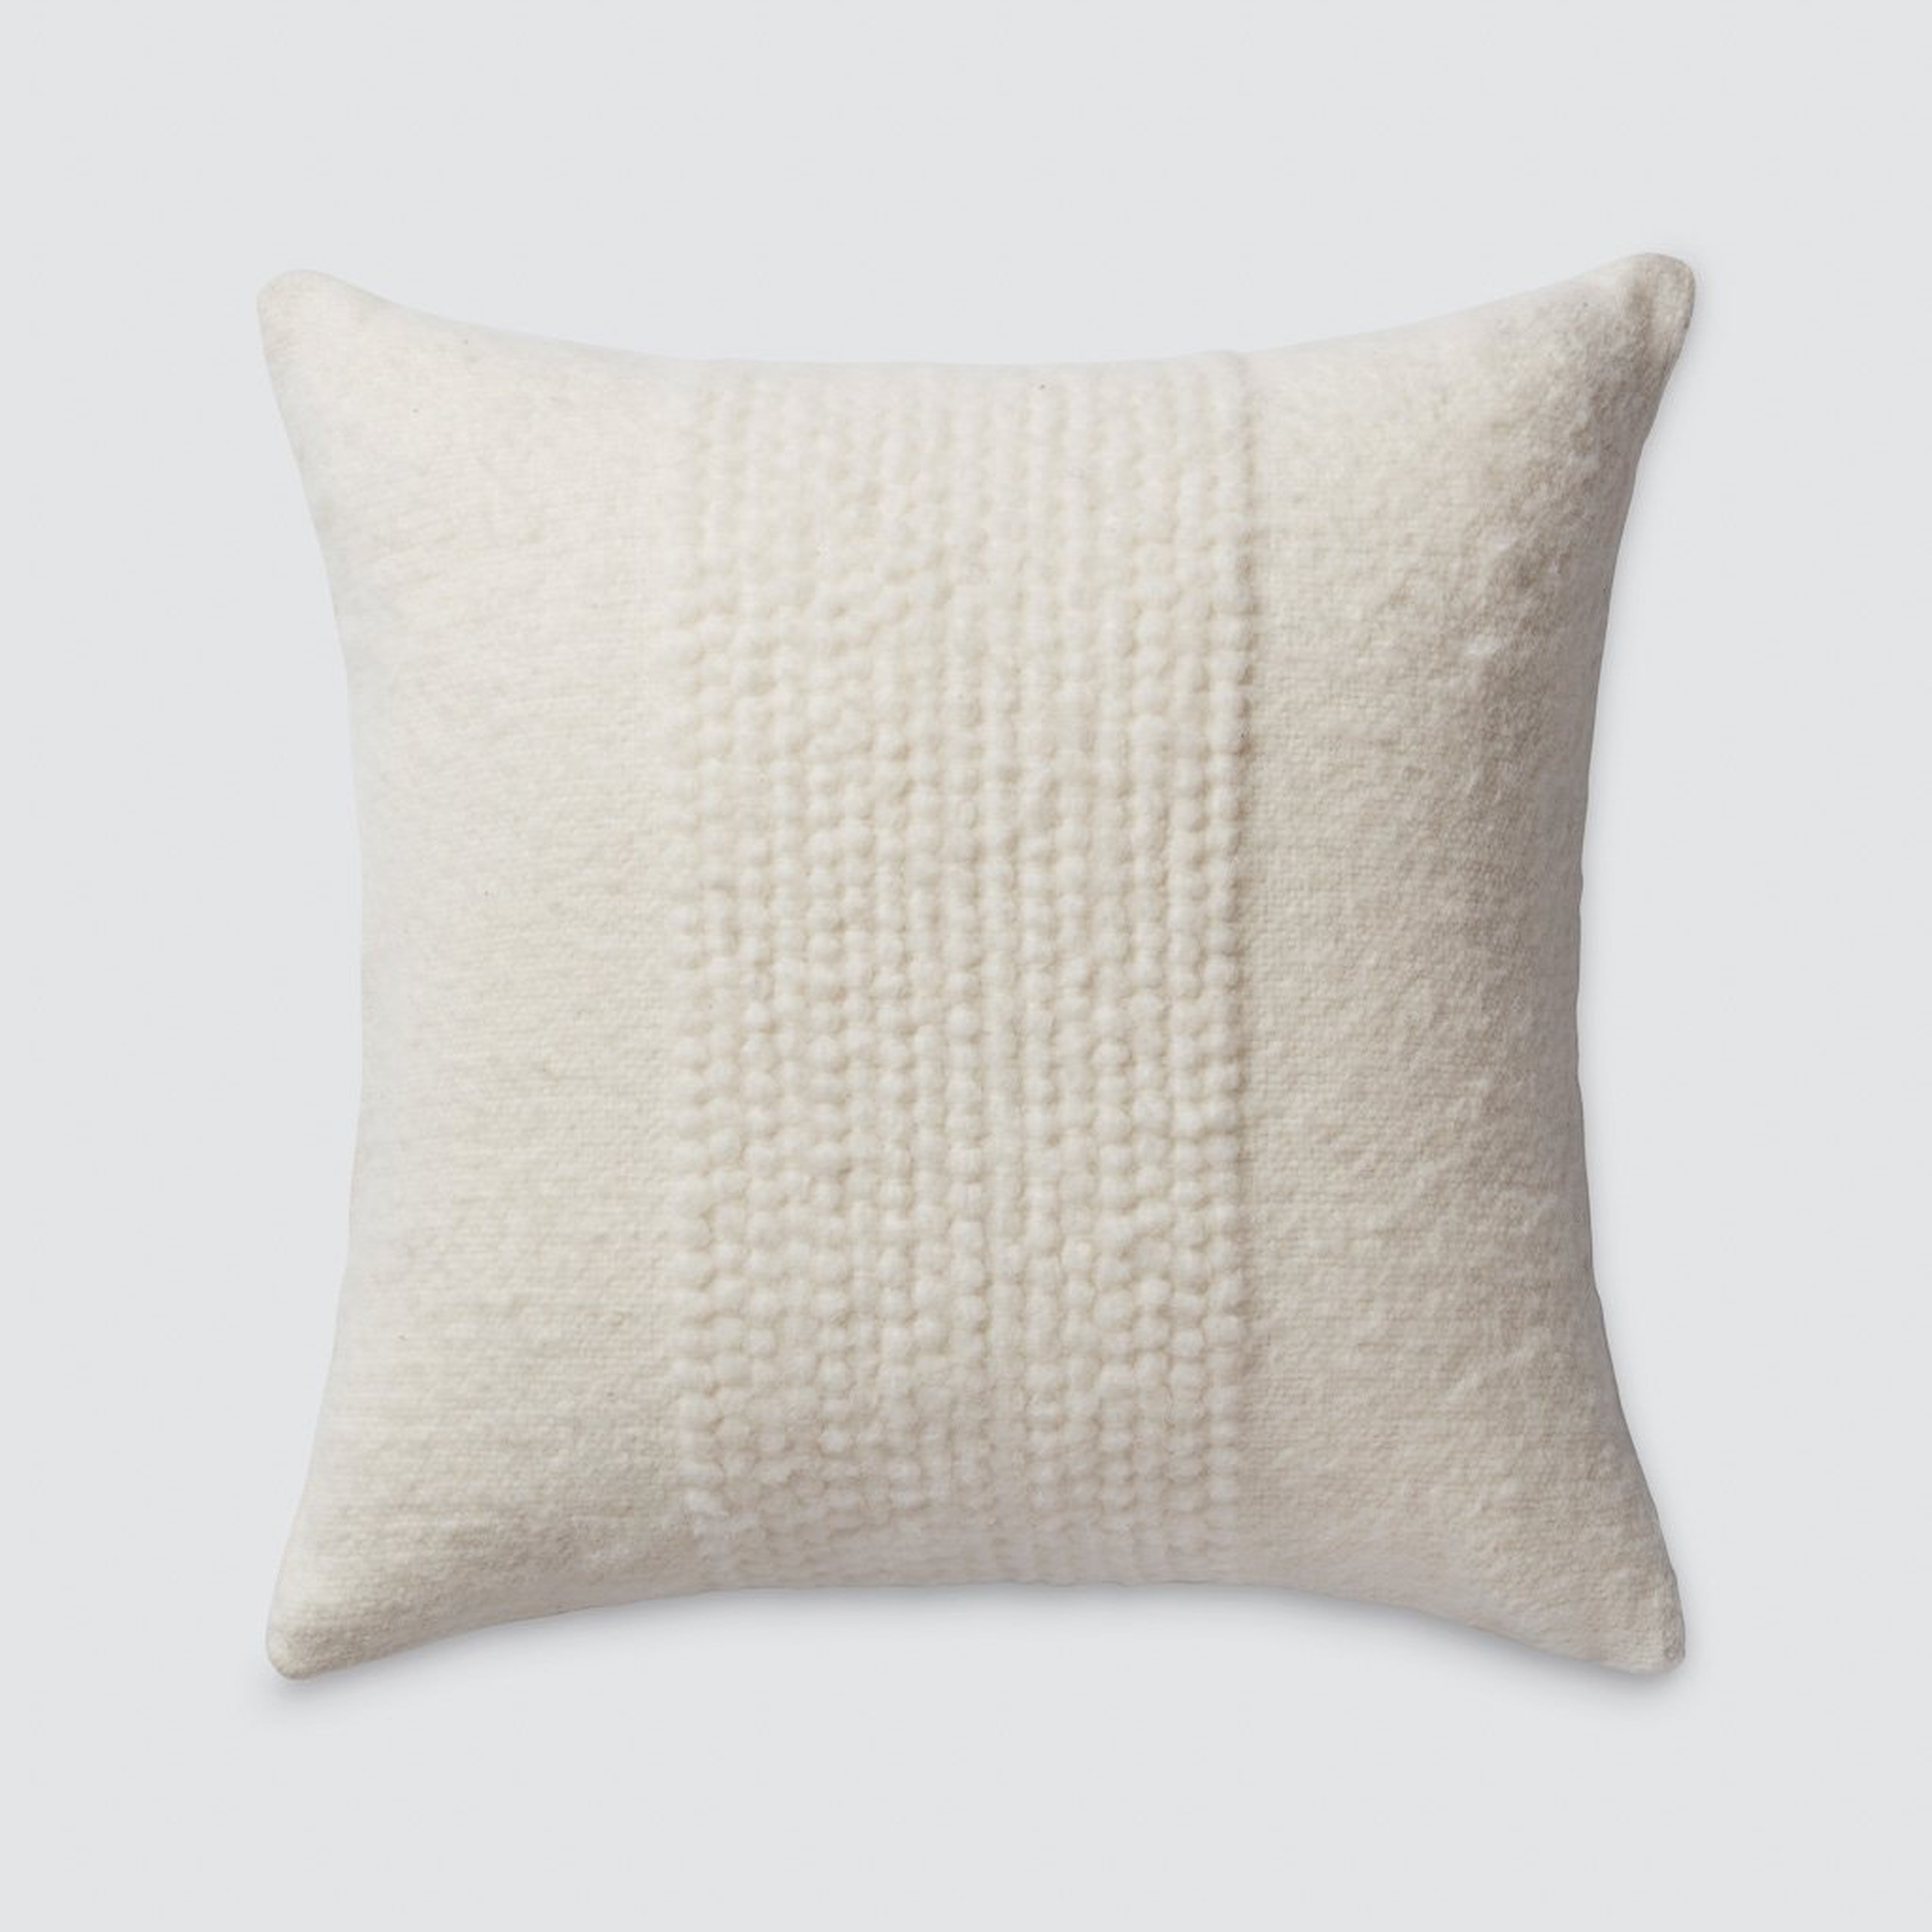 Veta Pillow - Ivory - 22'' x 22'' By The Citizenry - The Citizenry